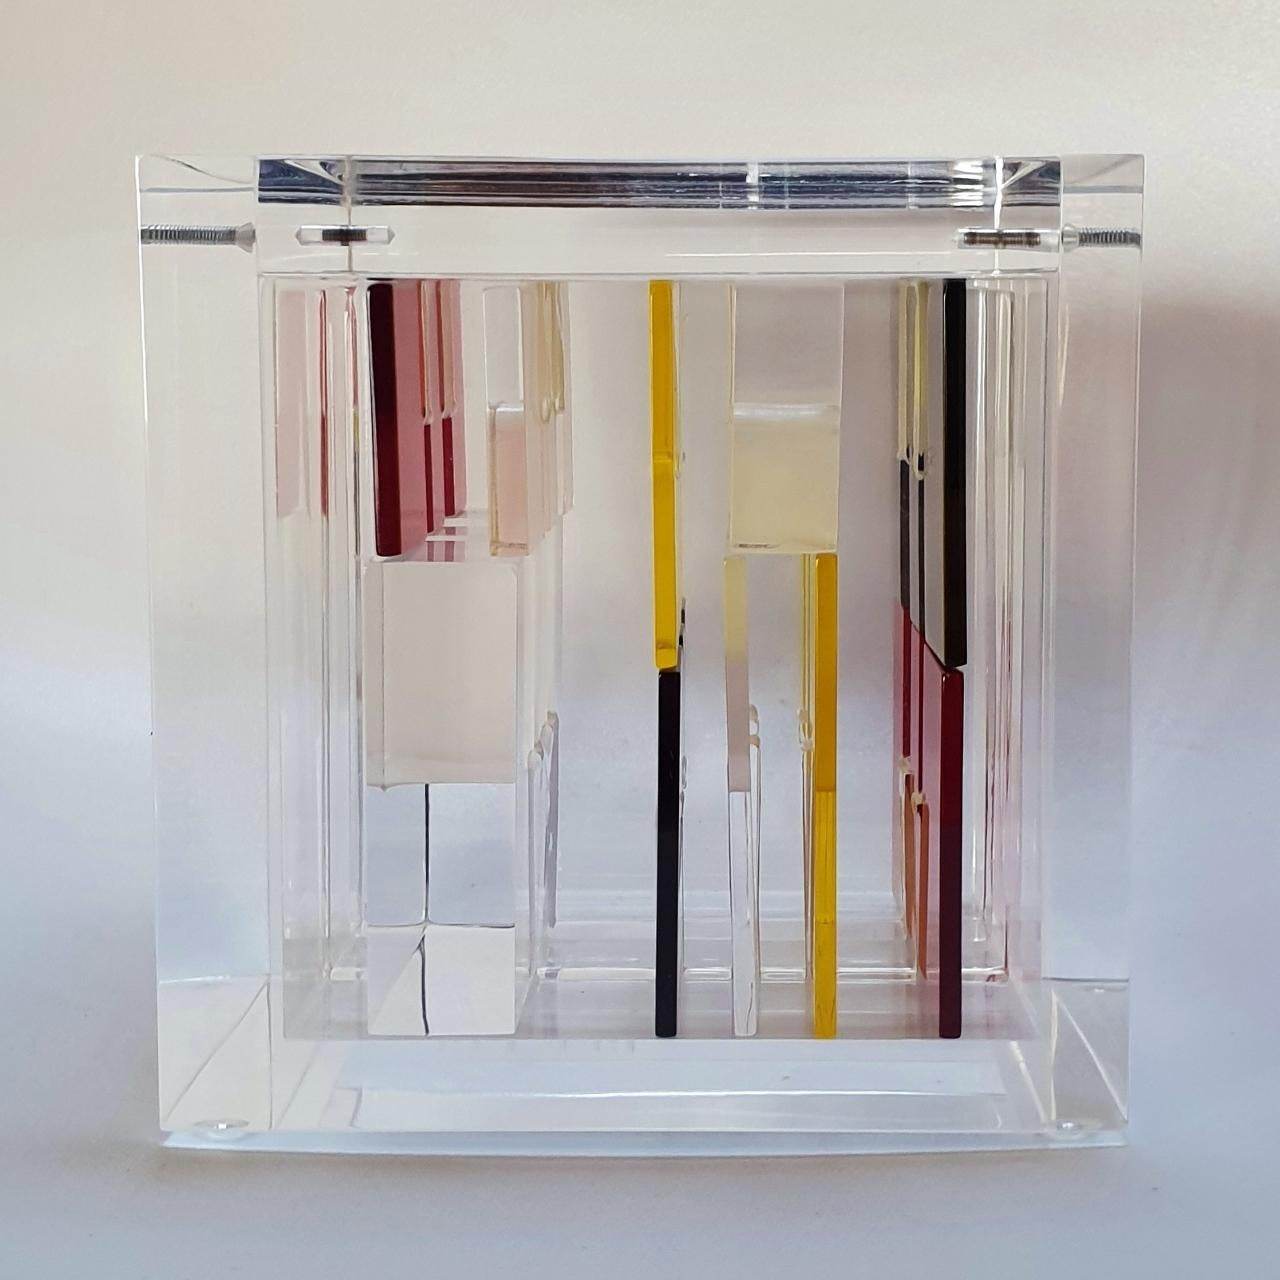 Homage to Mondriaan is a unique small size contemporary modern cube sculpture by the famous Dutch artist couple Nel Haringa and Fred Olijve. The cube sculpture consists of a dozen hand cut hand polished plexiglass elements carefully stacked together